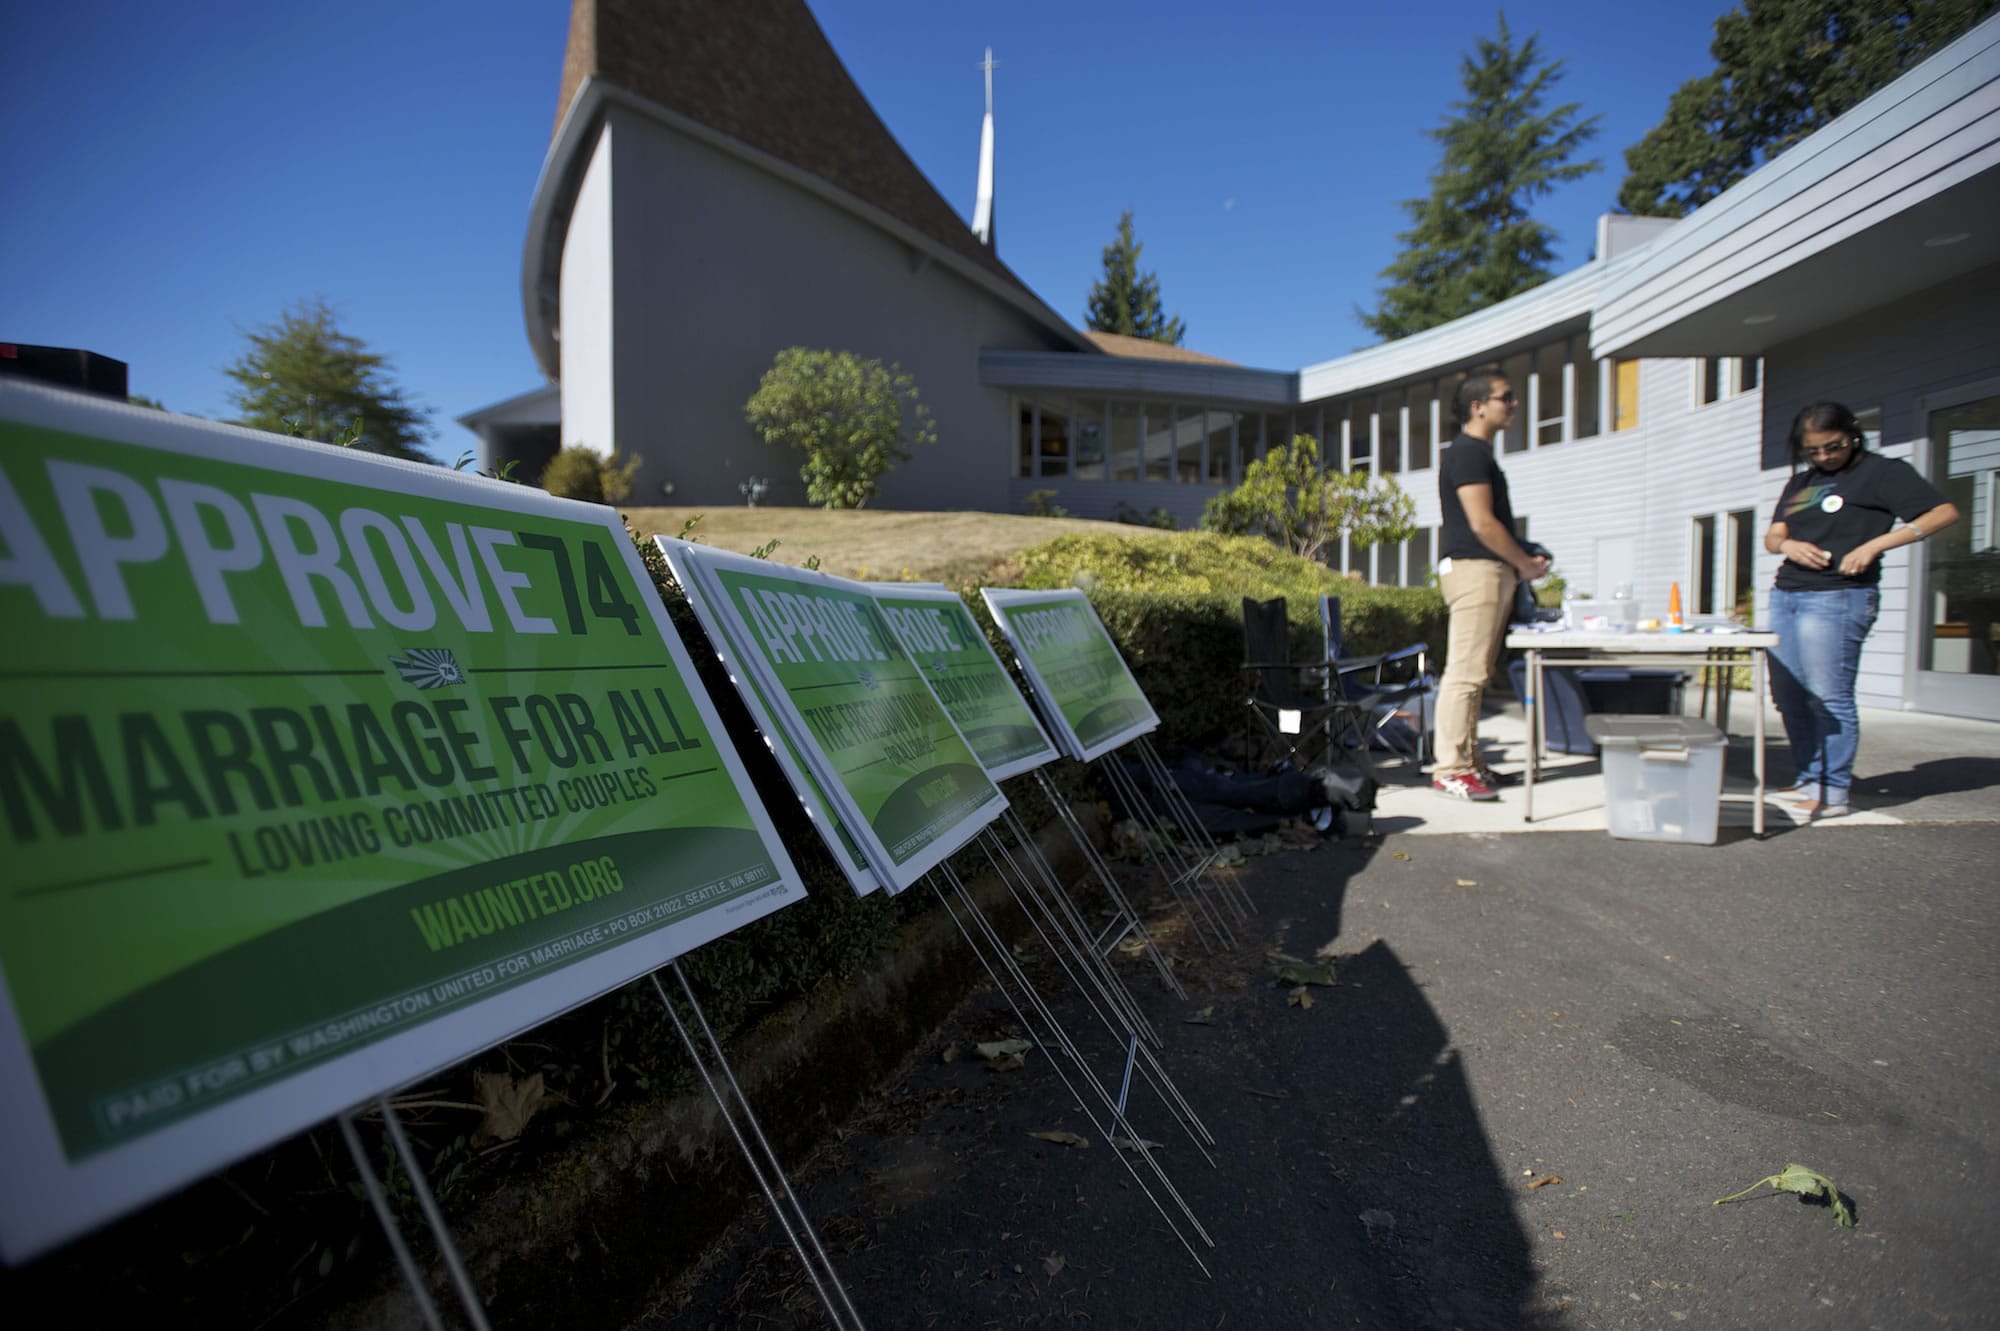 Same-sex marriage advocates Justin Pabalate, 31, and Jessica Nguyen-Ventura, 26, both of Portland, gather at the First Congregational Church in Hazel Dell before volunteers canvassed neighborhoods on Oct.